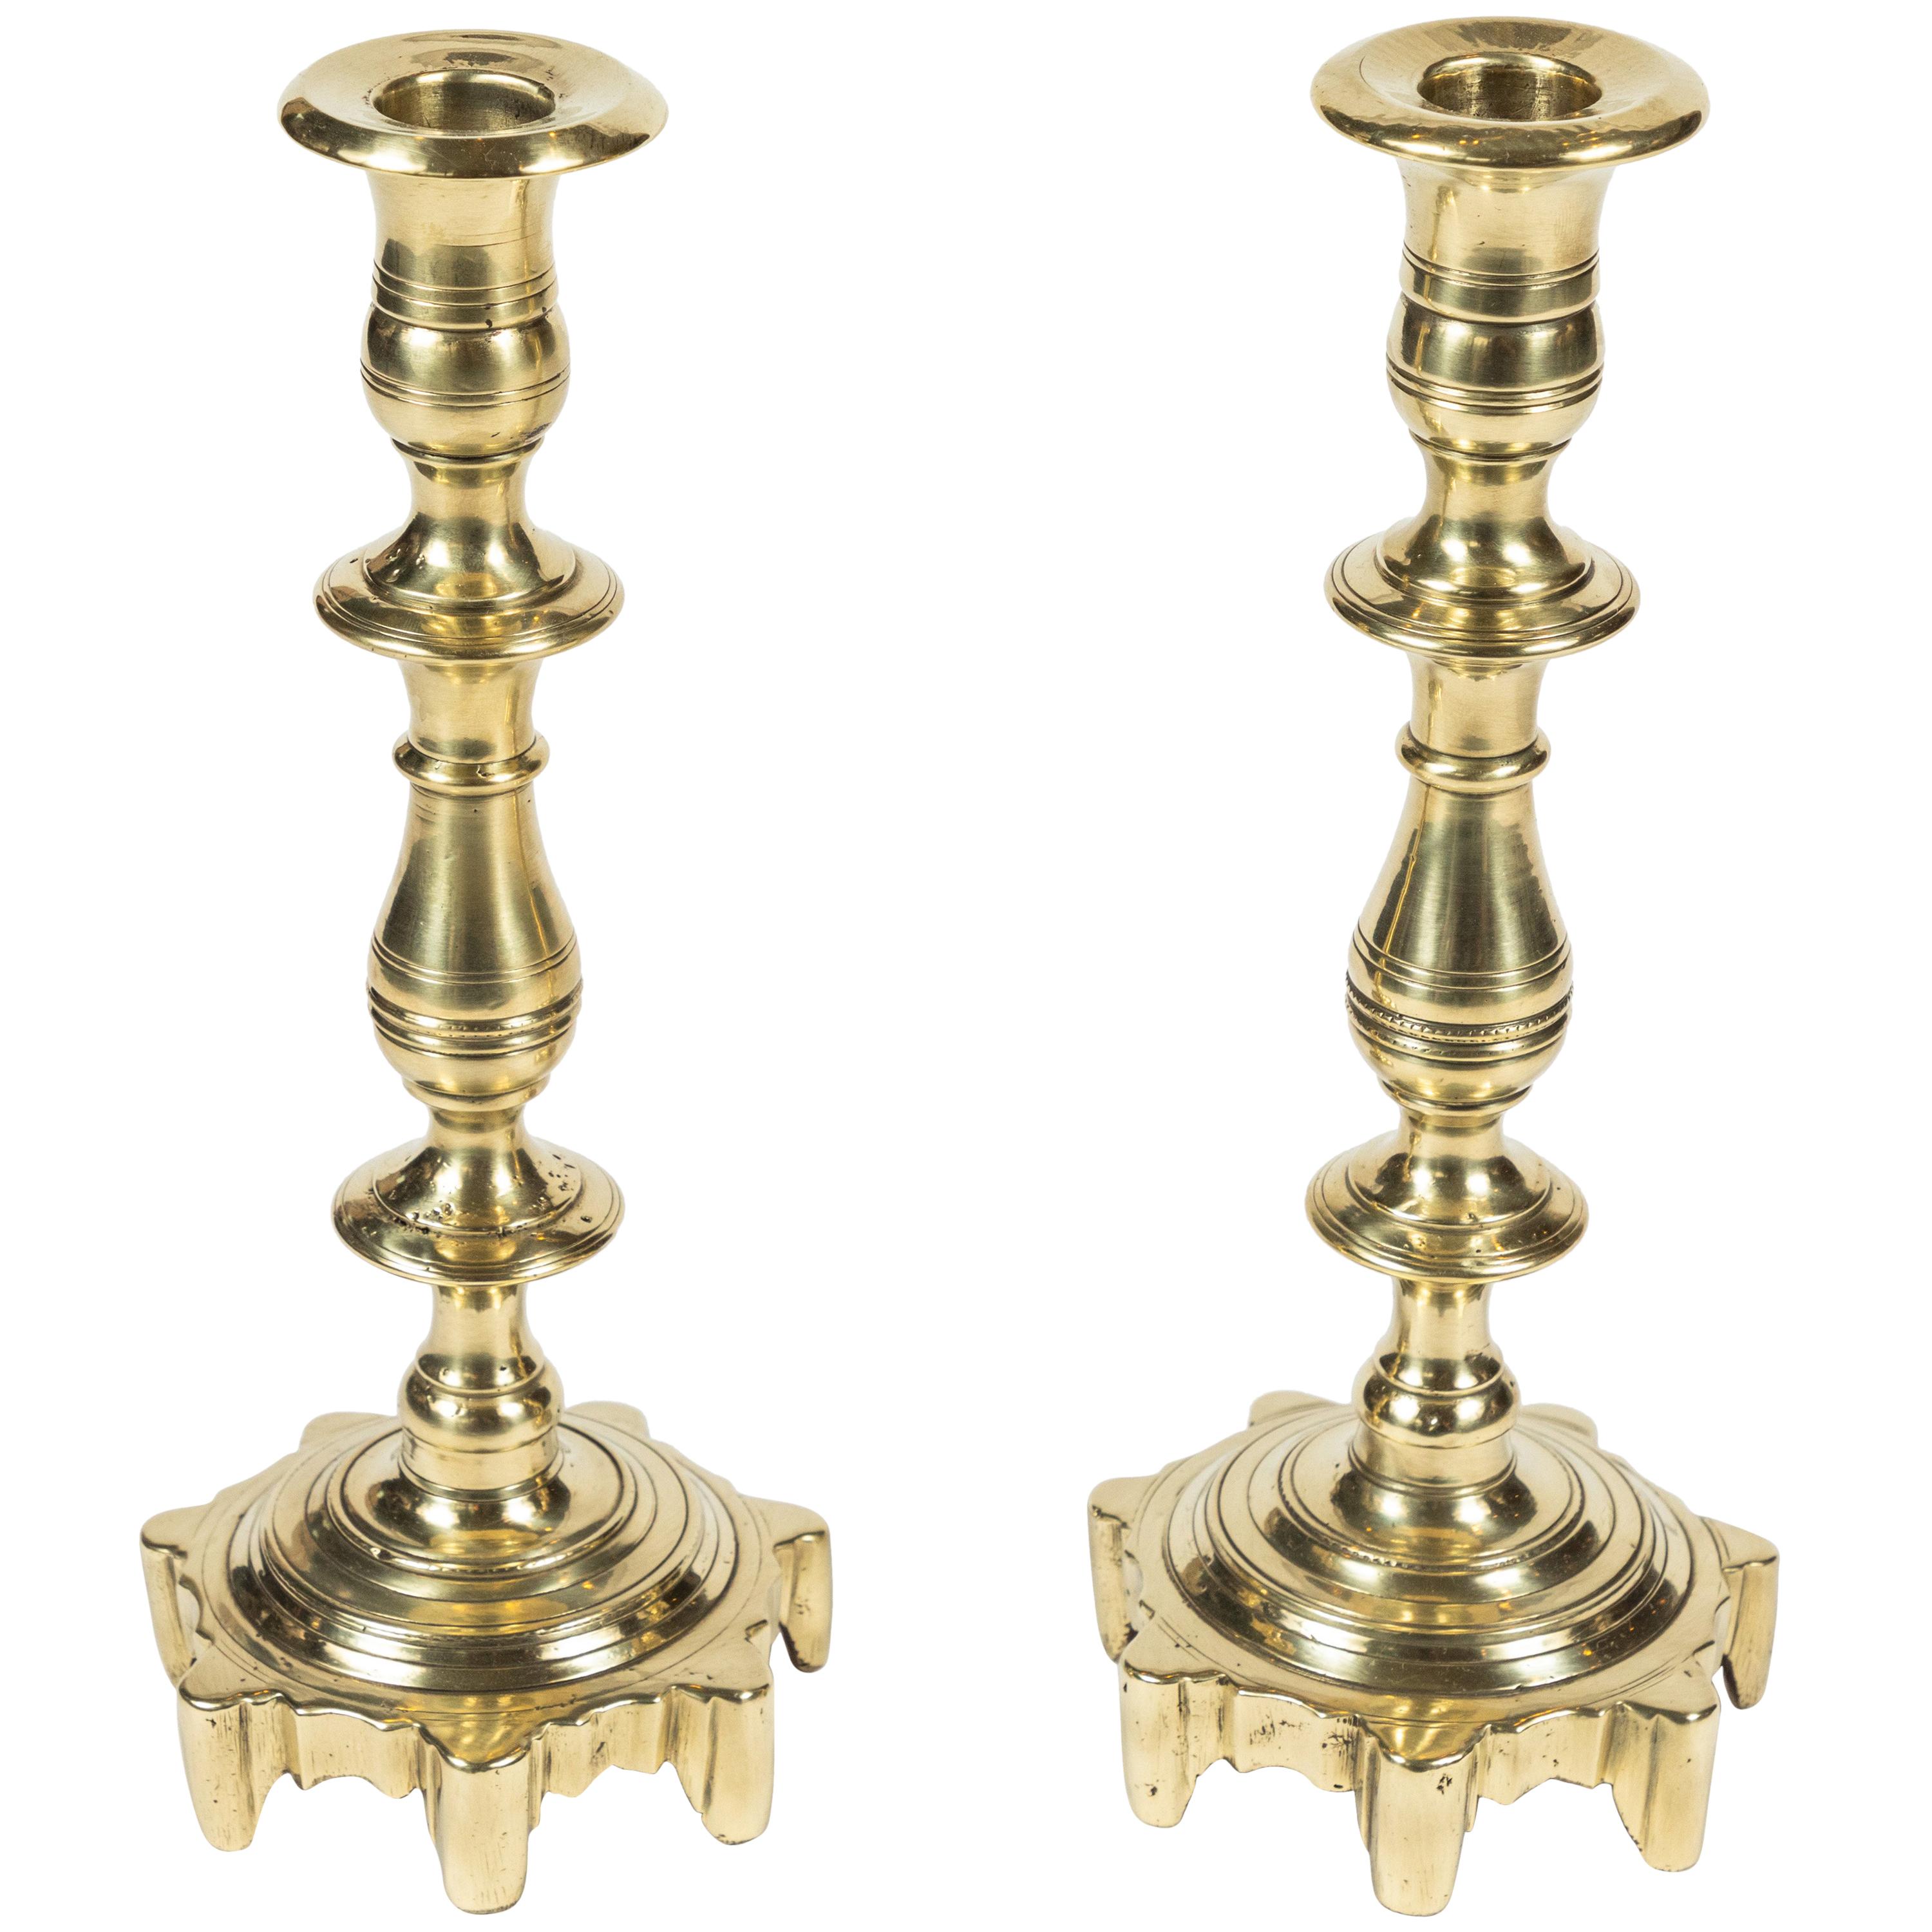 Pair of Antique Turned Stem and Multi Foot Base Brass Candlestick